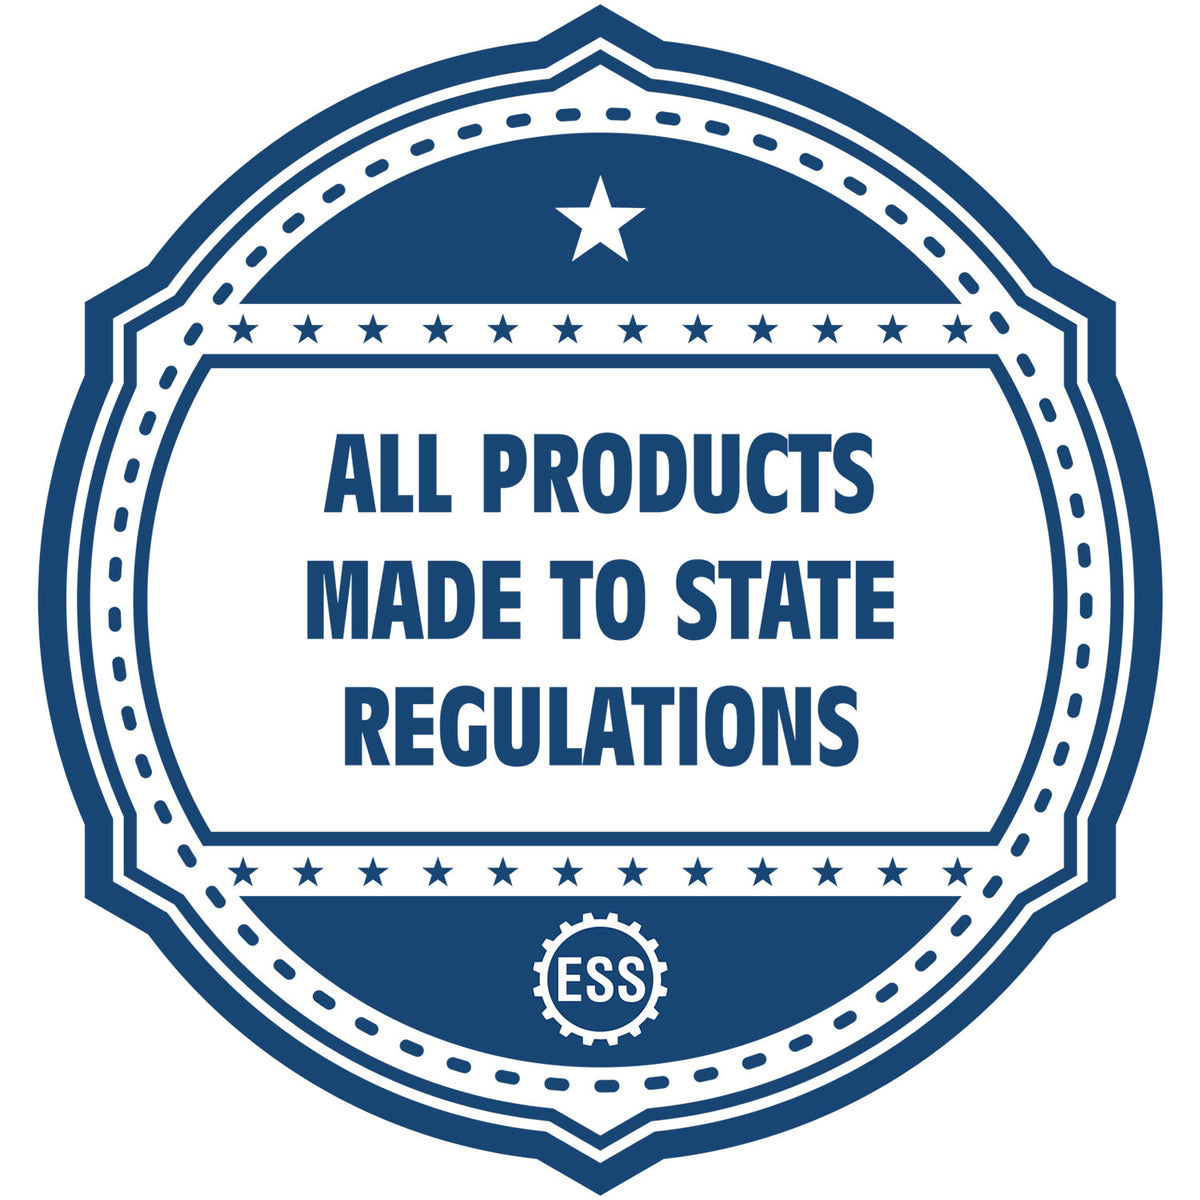 An icon or badge element for the Soft Pocket Rhode Island Landscape Architect Embosser showing that this product is made in compliance with state regulations.